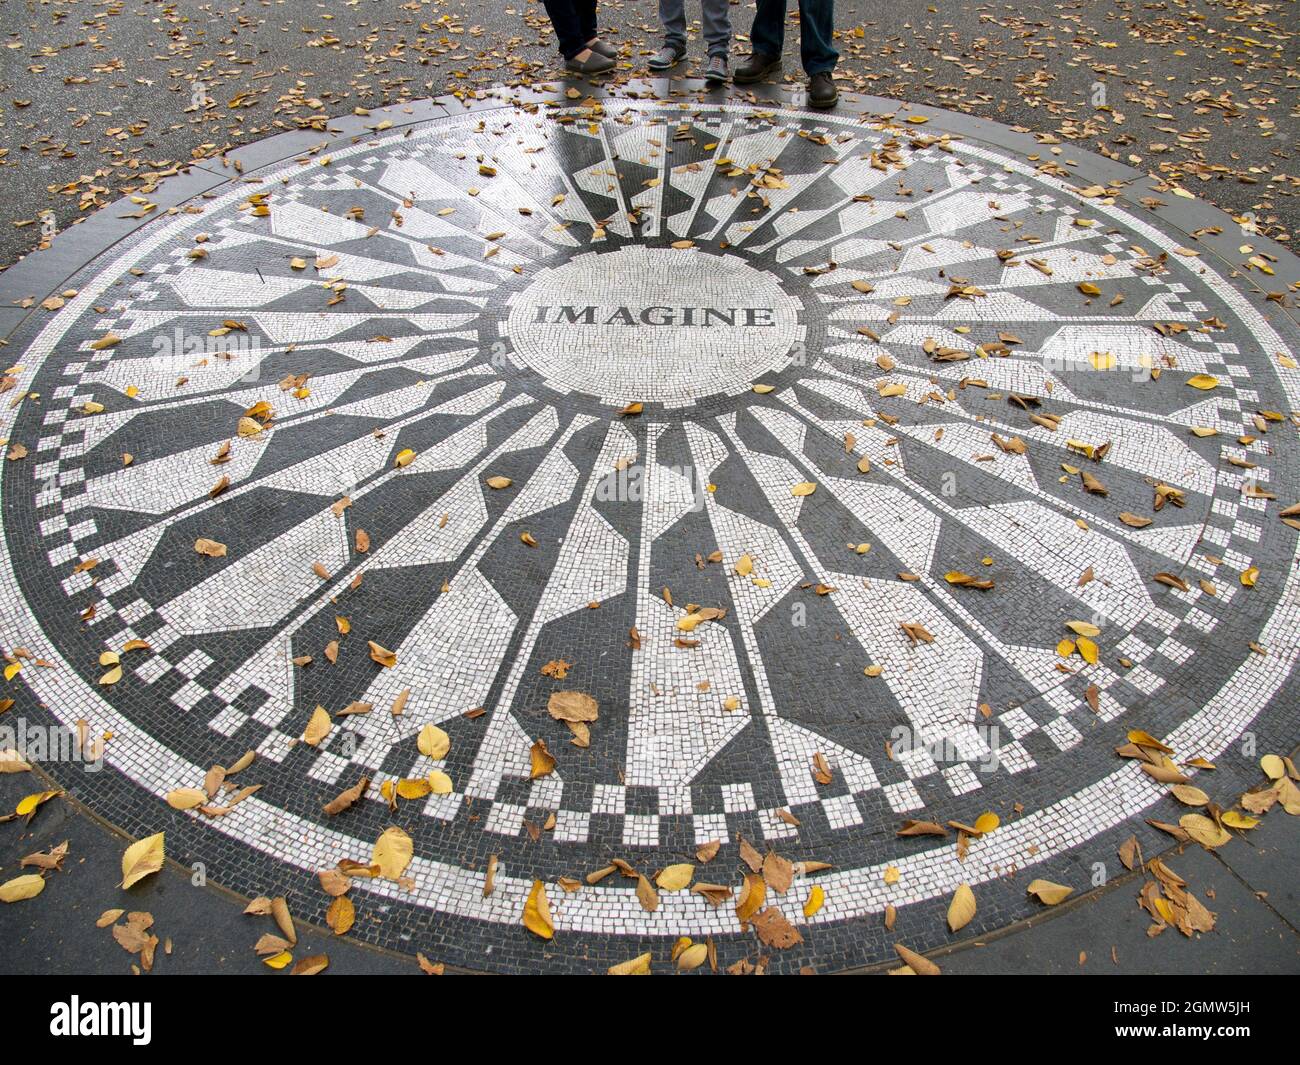 New York, USA - 3 November 2013; no people in view. An iconic place in an iconic city - the simple but dignified memorial to John Lennon in Strawberry Stock Photo